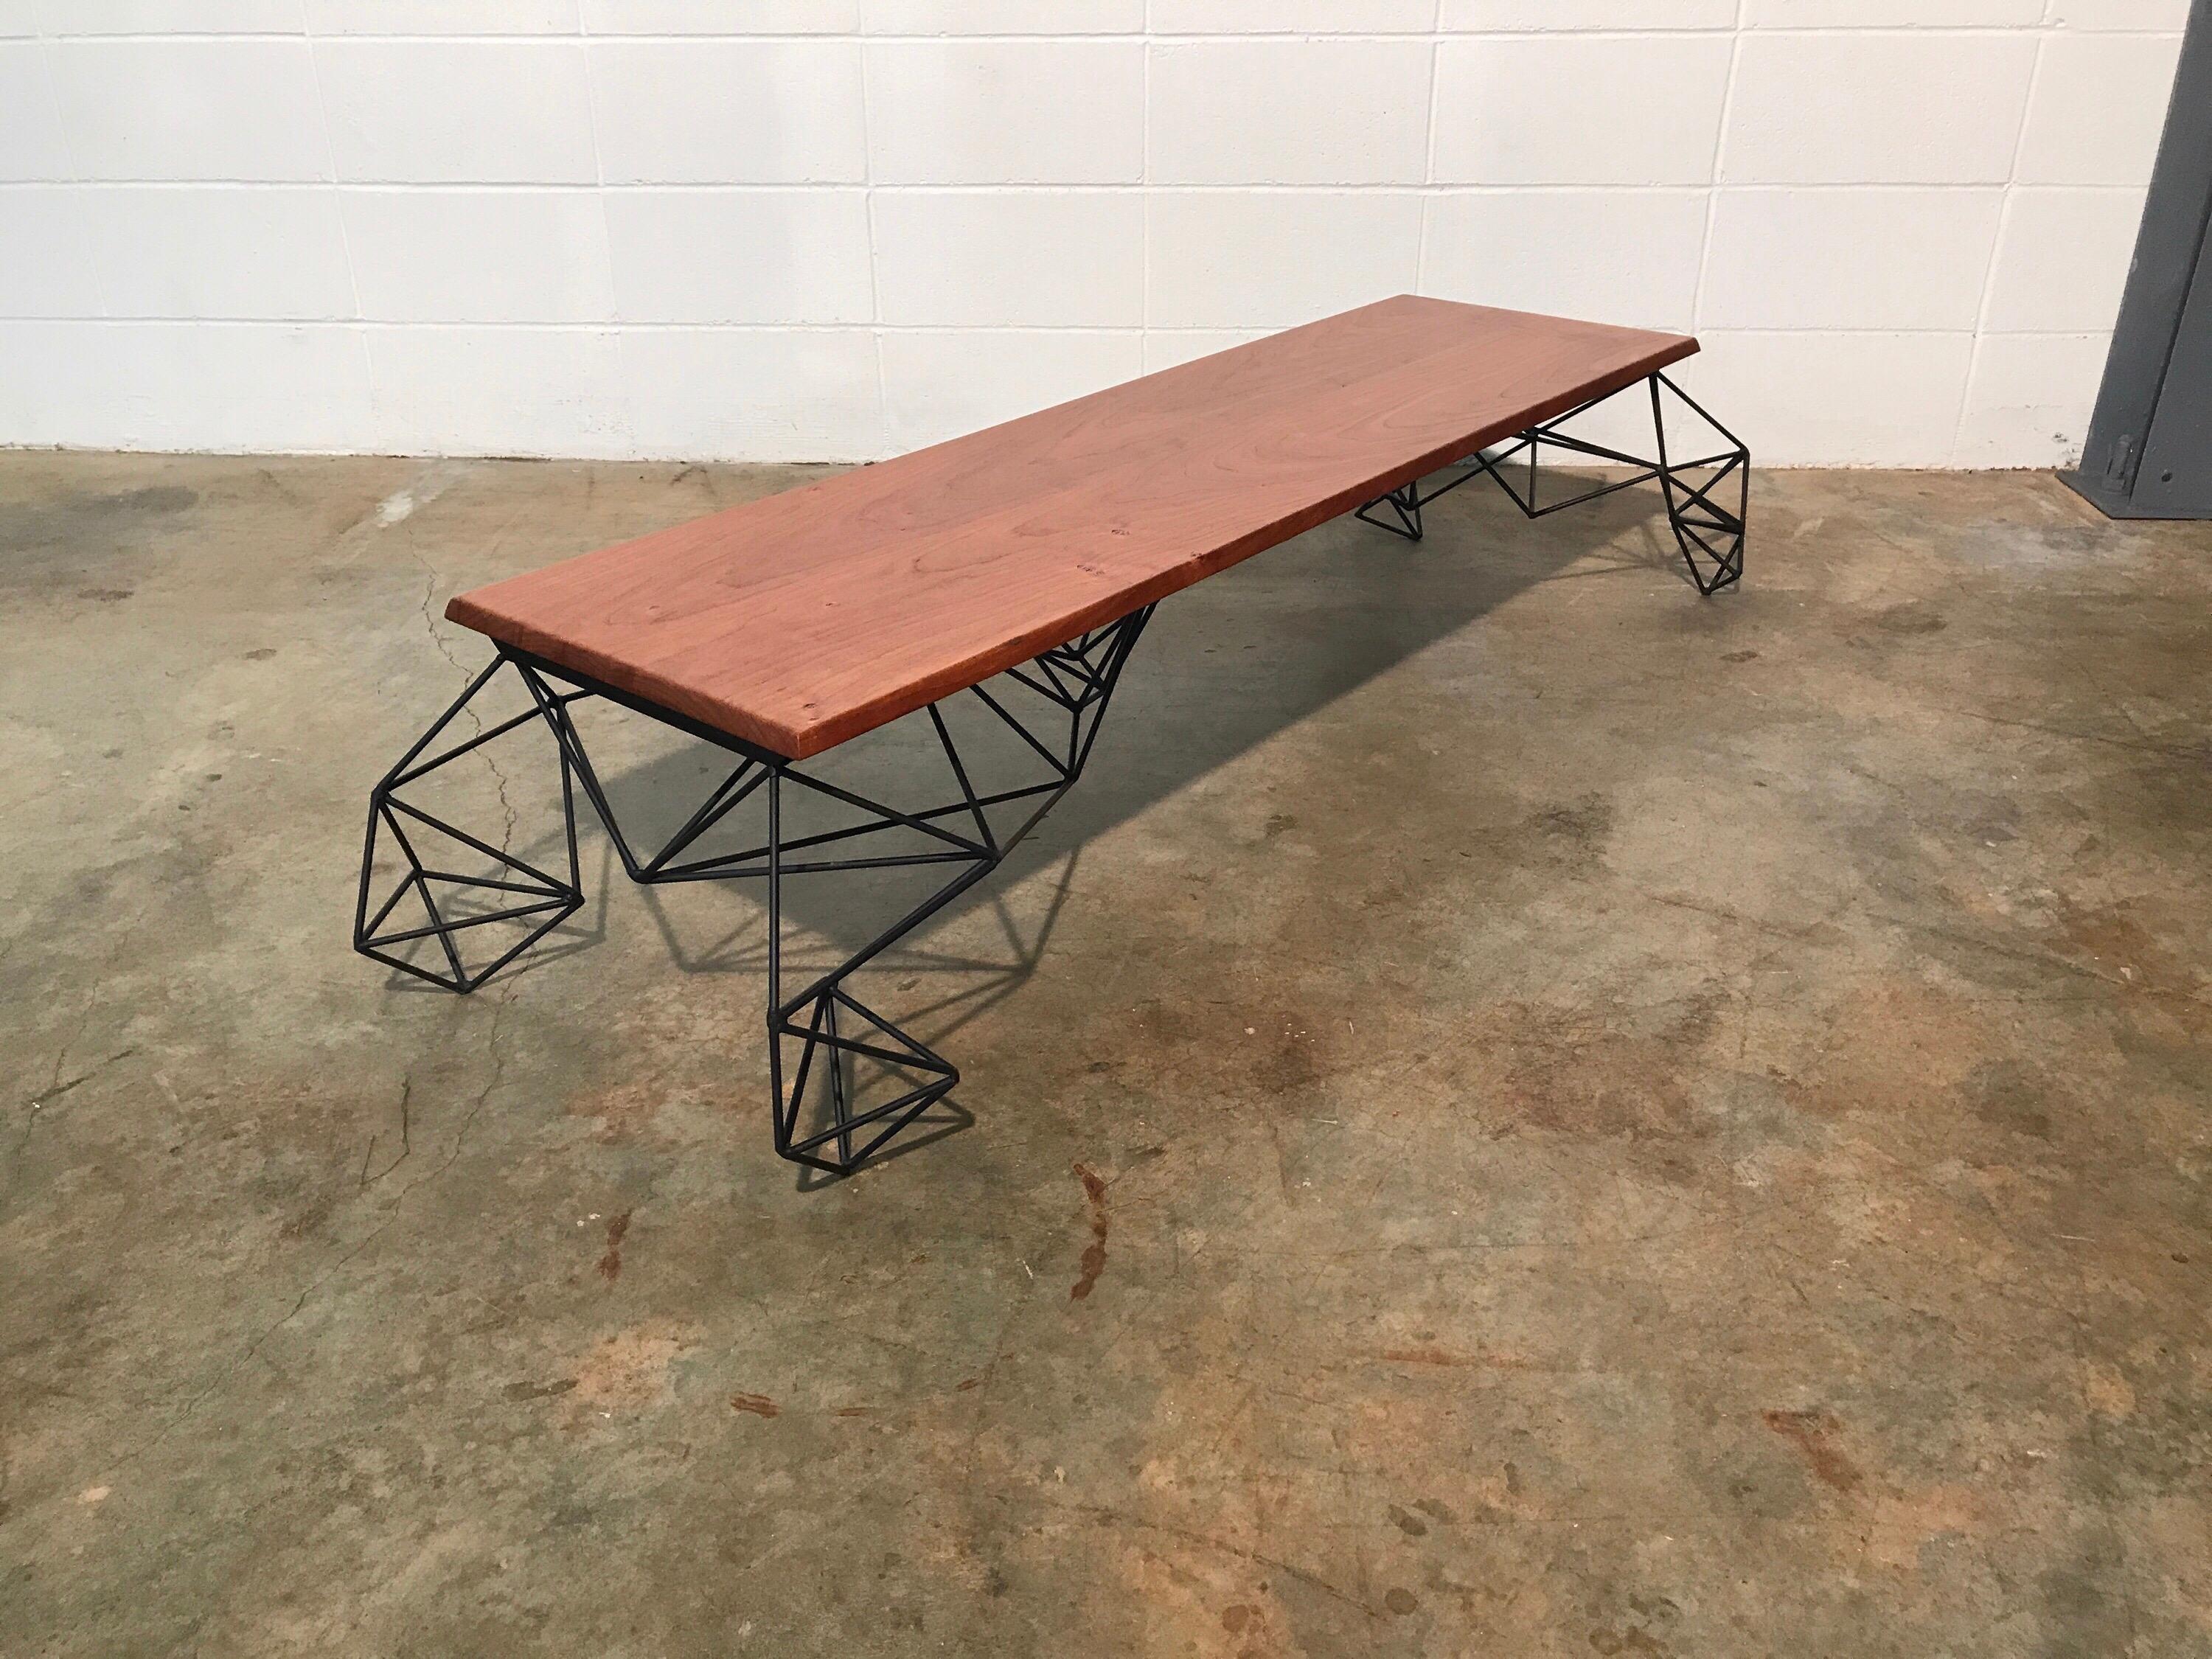 Sculptural Modern Geometric Custom Designed and Fabricated Coffee Table For Sale 3